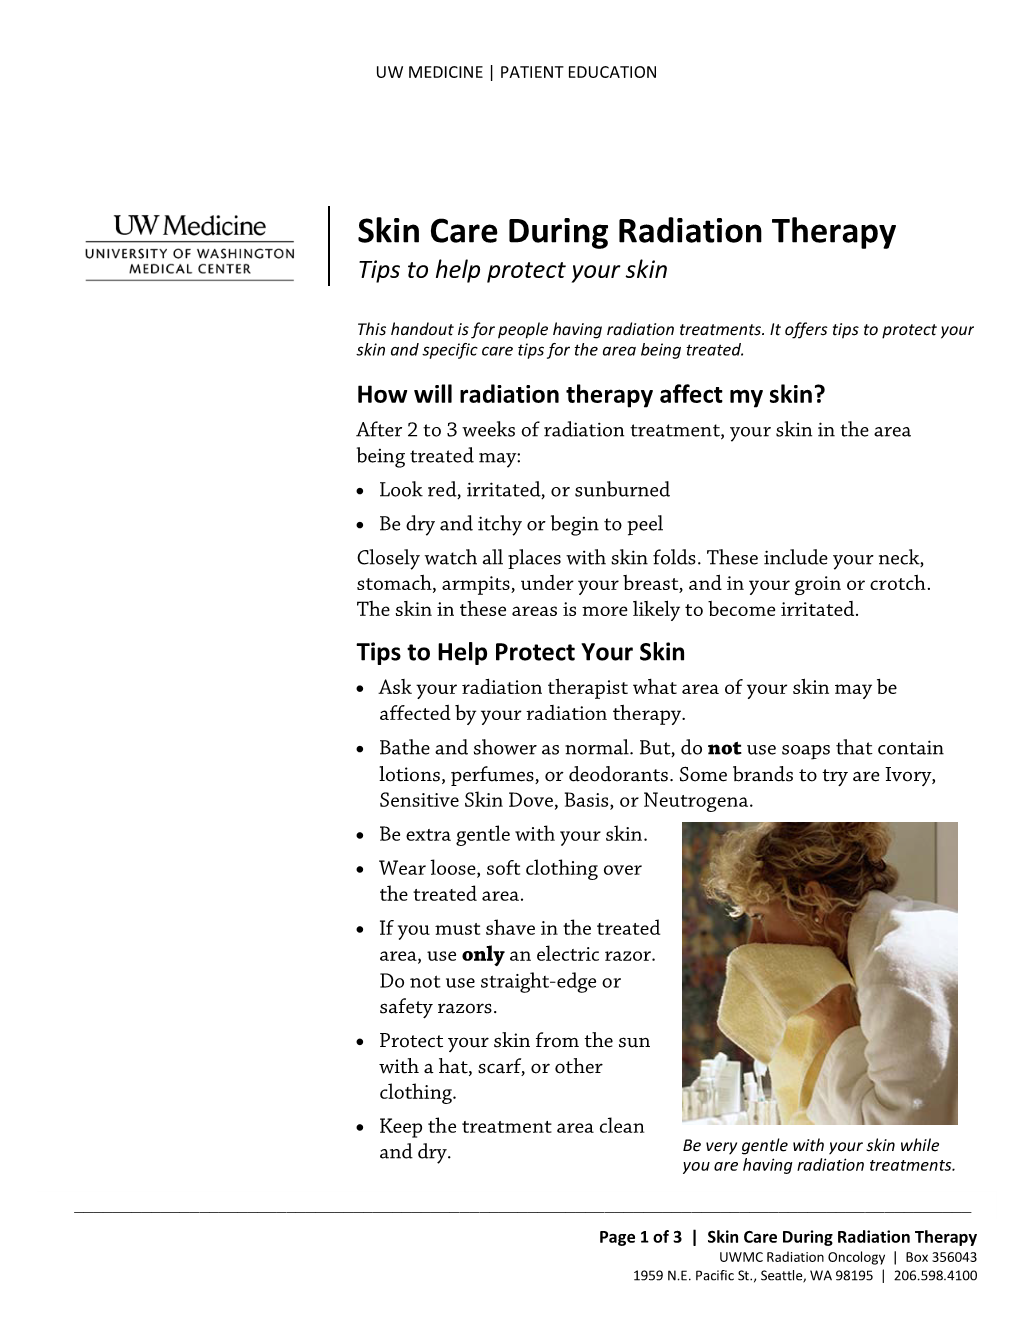 Skin Care During Radiation Therapy | | Tips to Help Protect Your Skin